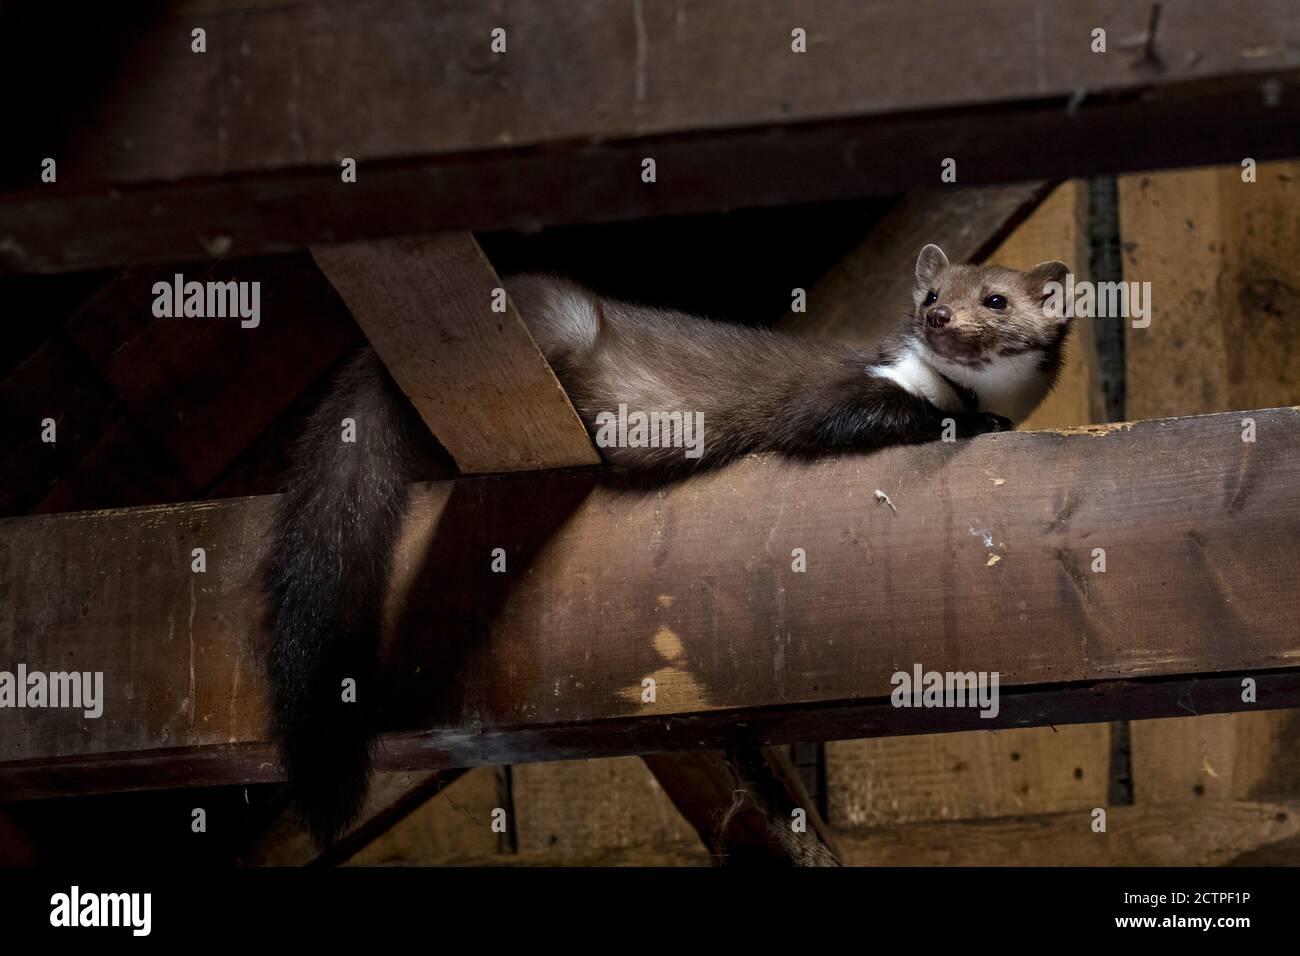 Beech marten / stone marten (Martes foina) looking down from beam in wooden roof truss of barn / shed / house Stock Photo